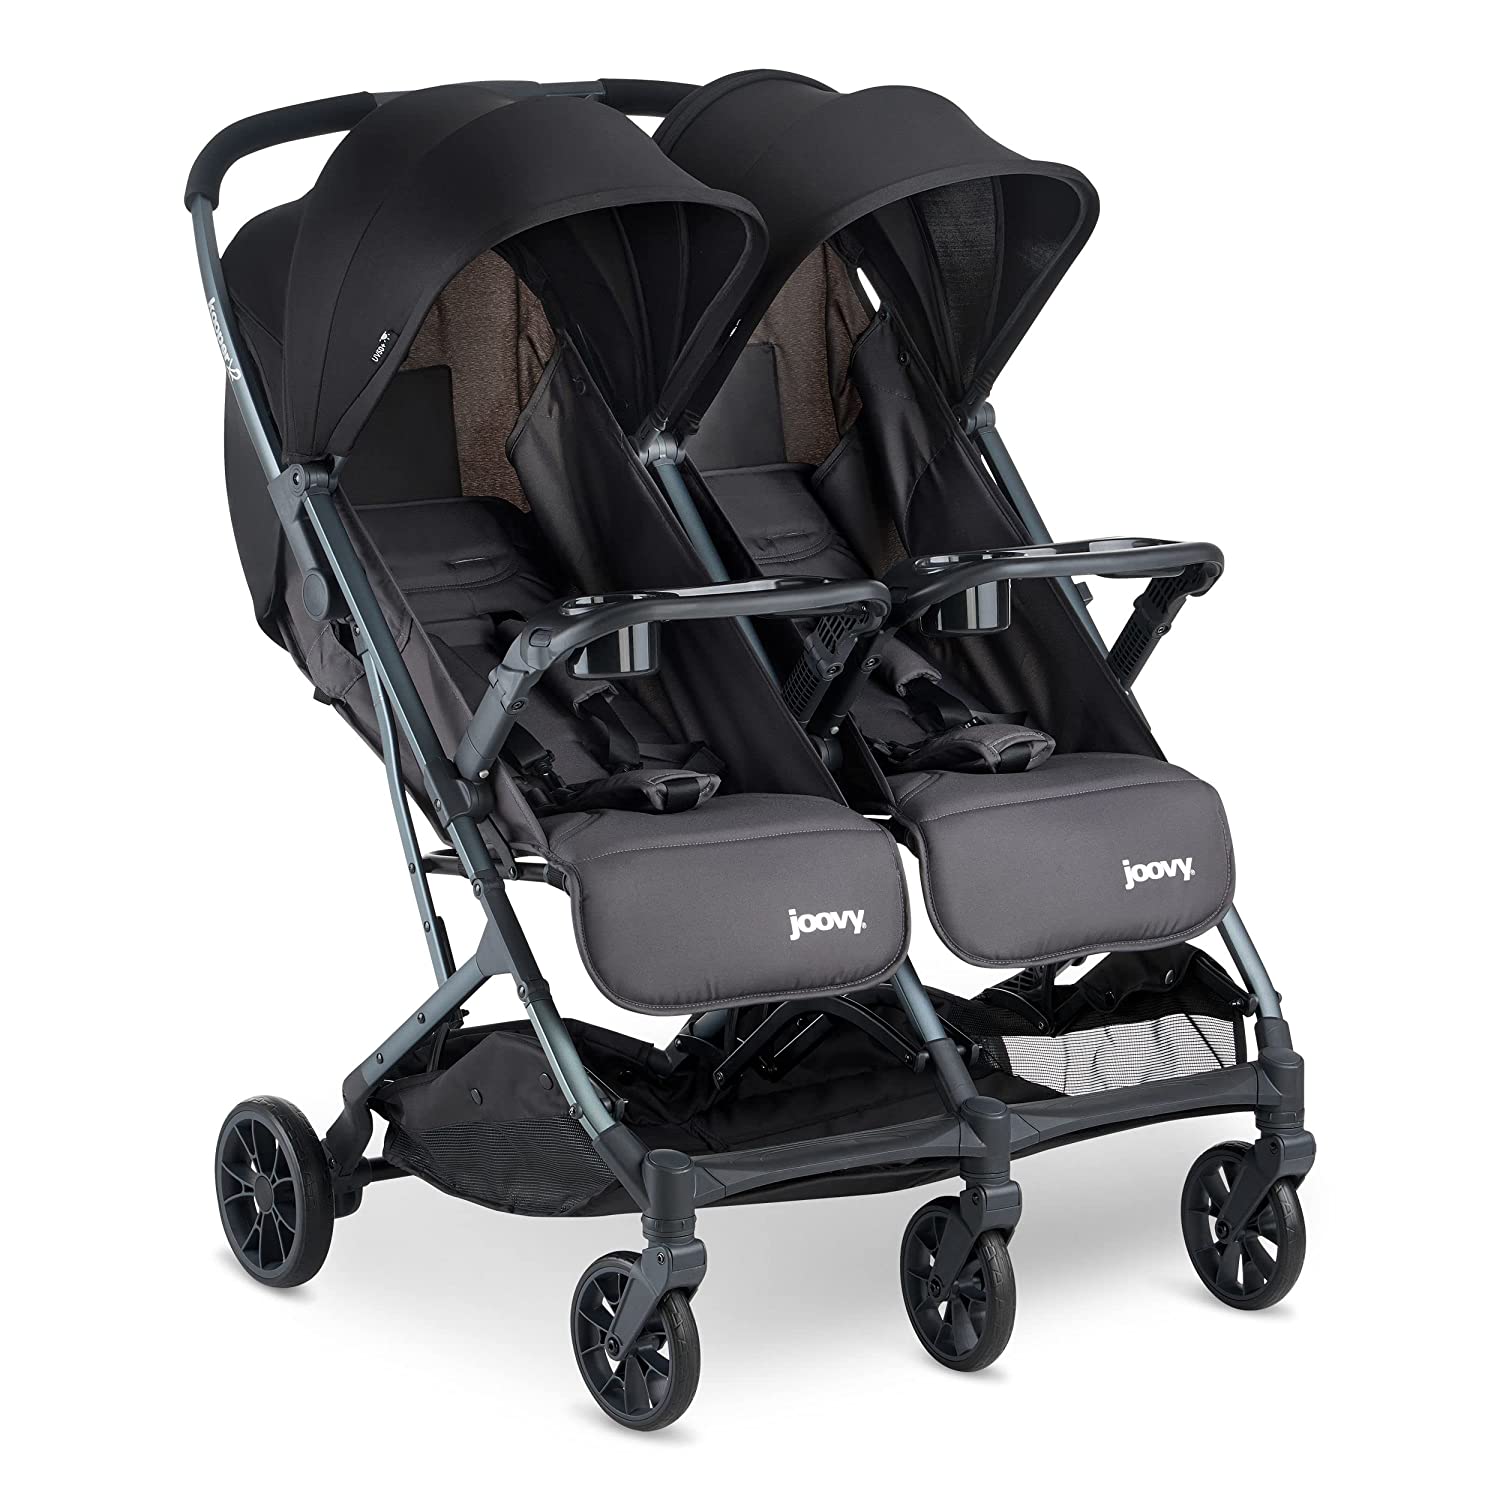 Joovy Kooper X2 Side-by-Side Double Stroller Featuring Dual Snack Trays, One-Handed Fold, Multi-Position Reclining Seats, Adjustable Leg Rests, and 2...
